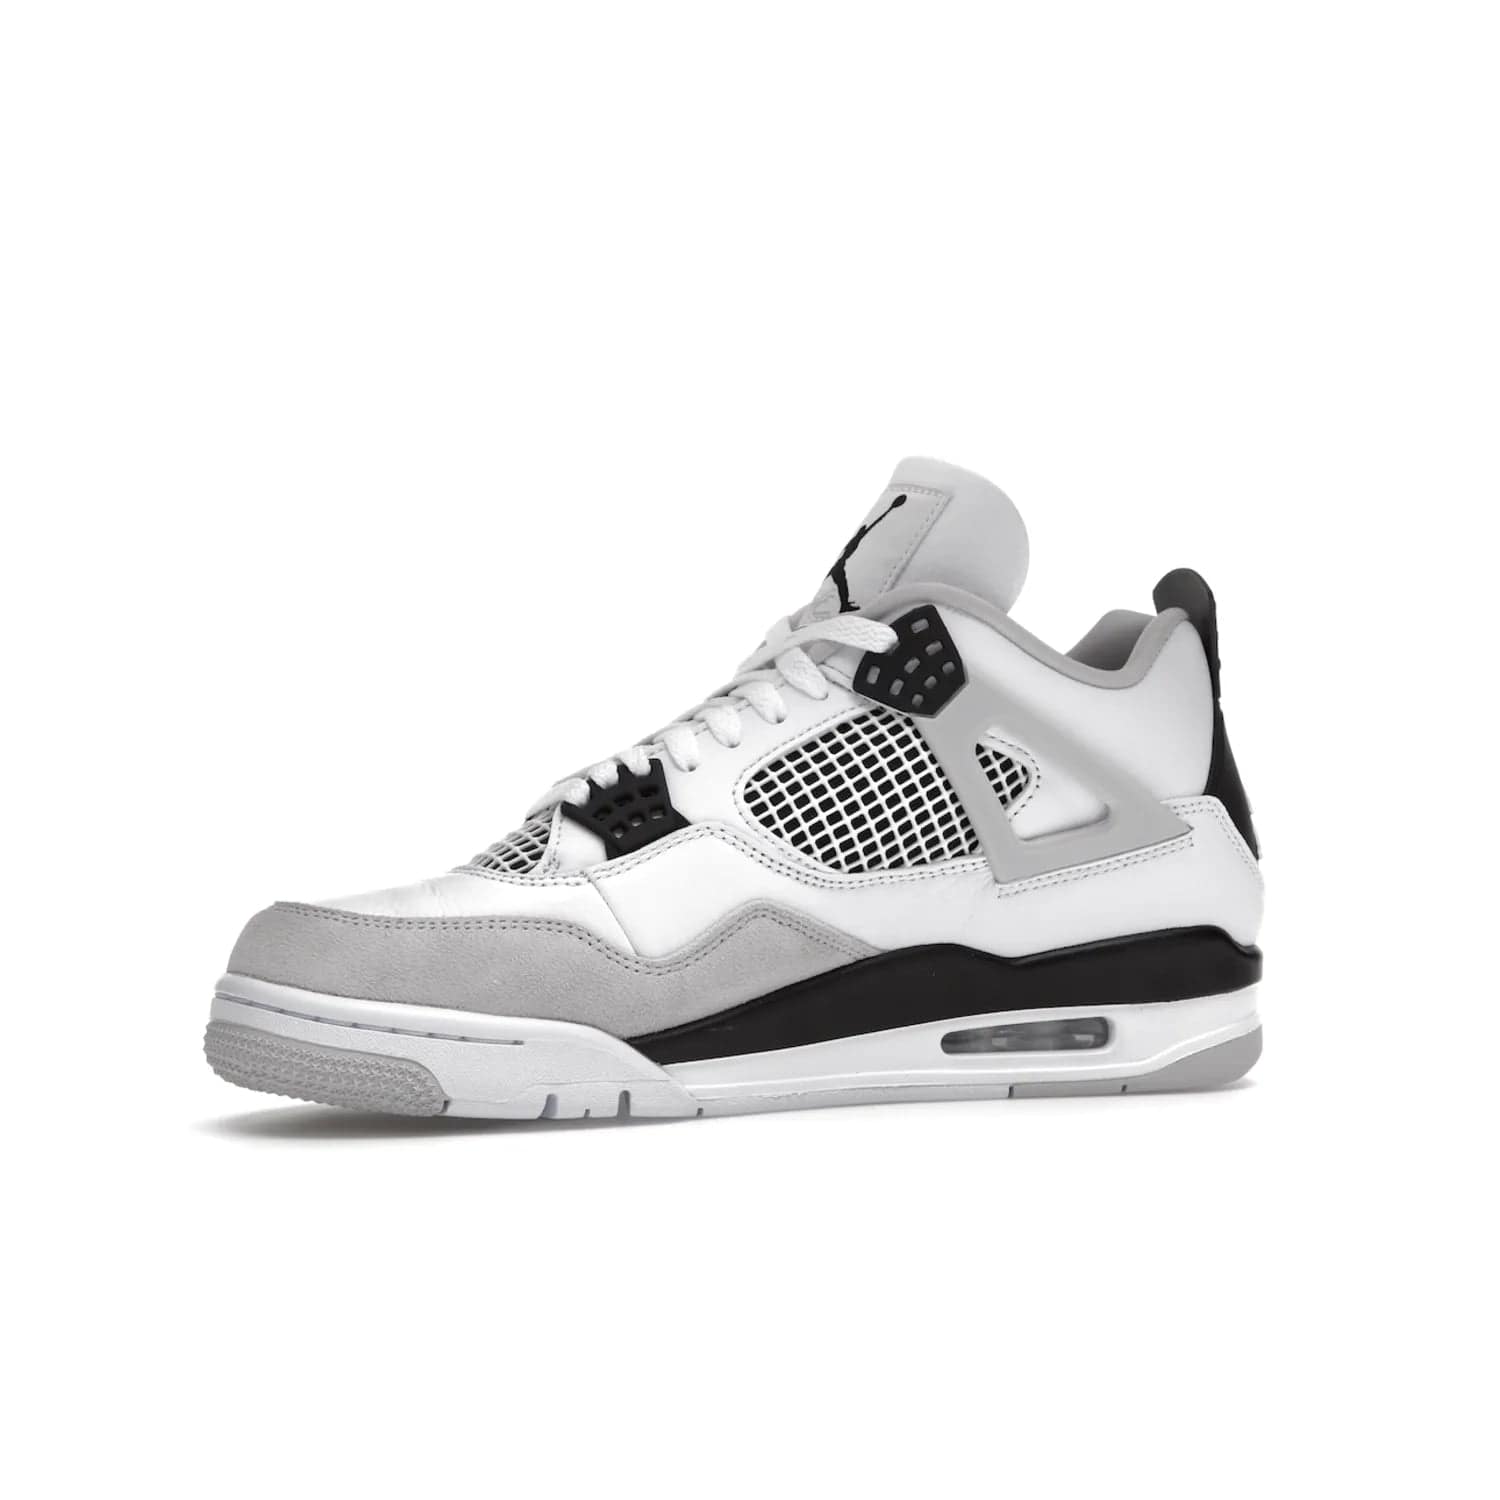 Jordan 4 Retro Military Black - Image 17 - Only at www.BallersClubKickz.com - Updated Air Jordan 4 style with a white/black/light grey sole and visible Air unit. Released in May 2022, offering timeless classic style and comfort.